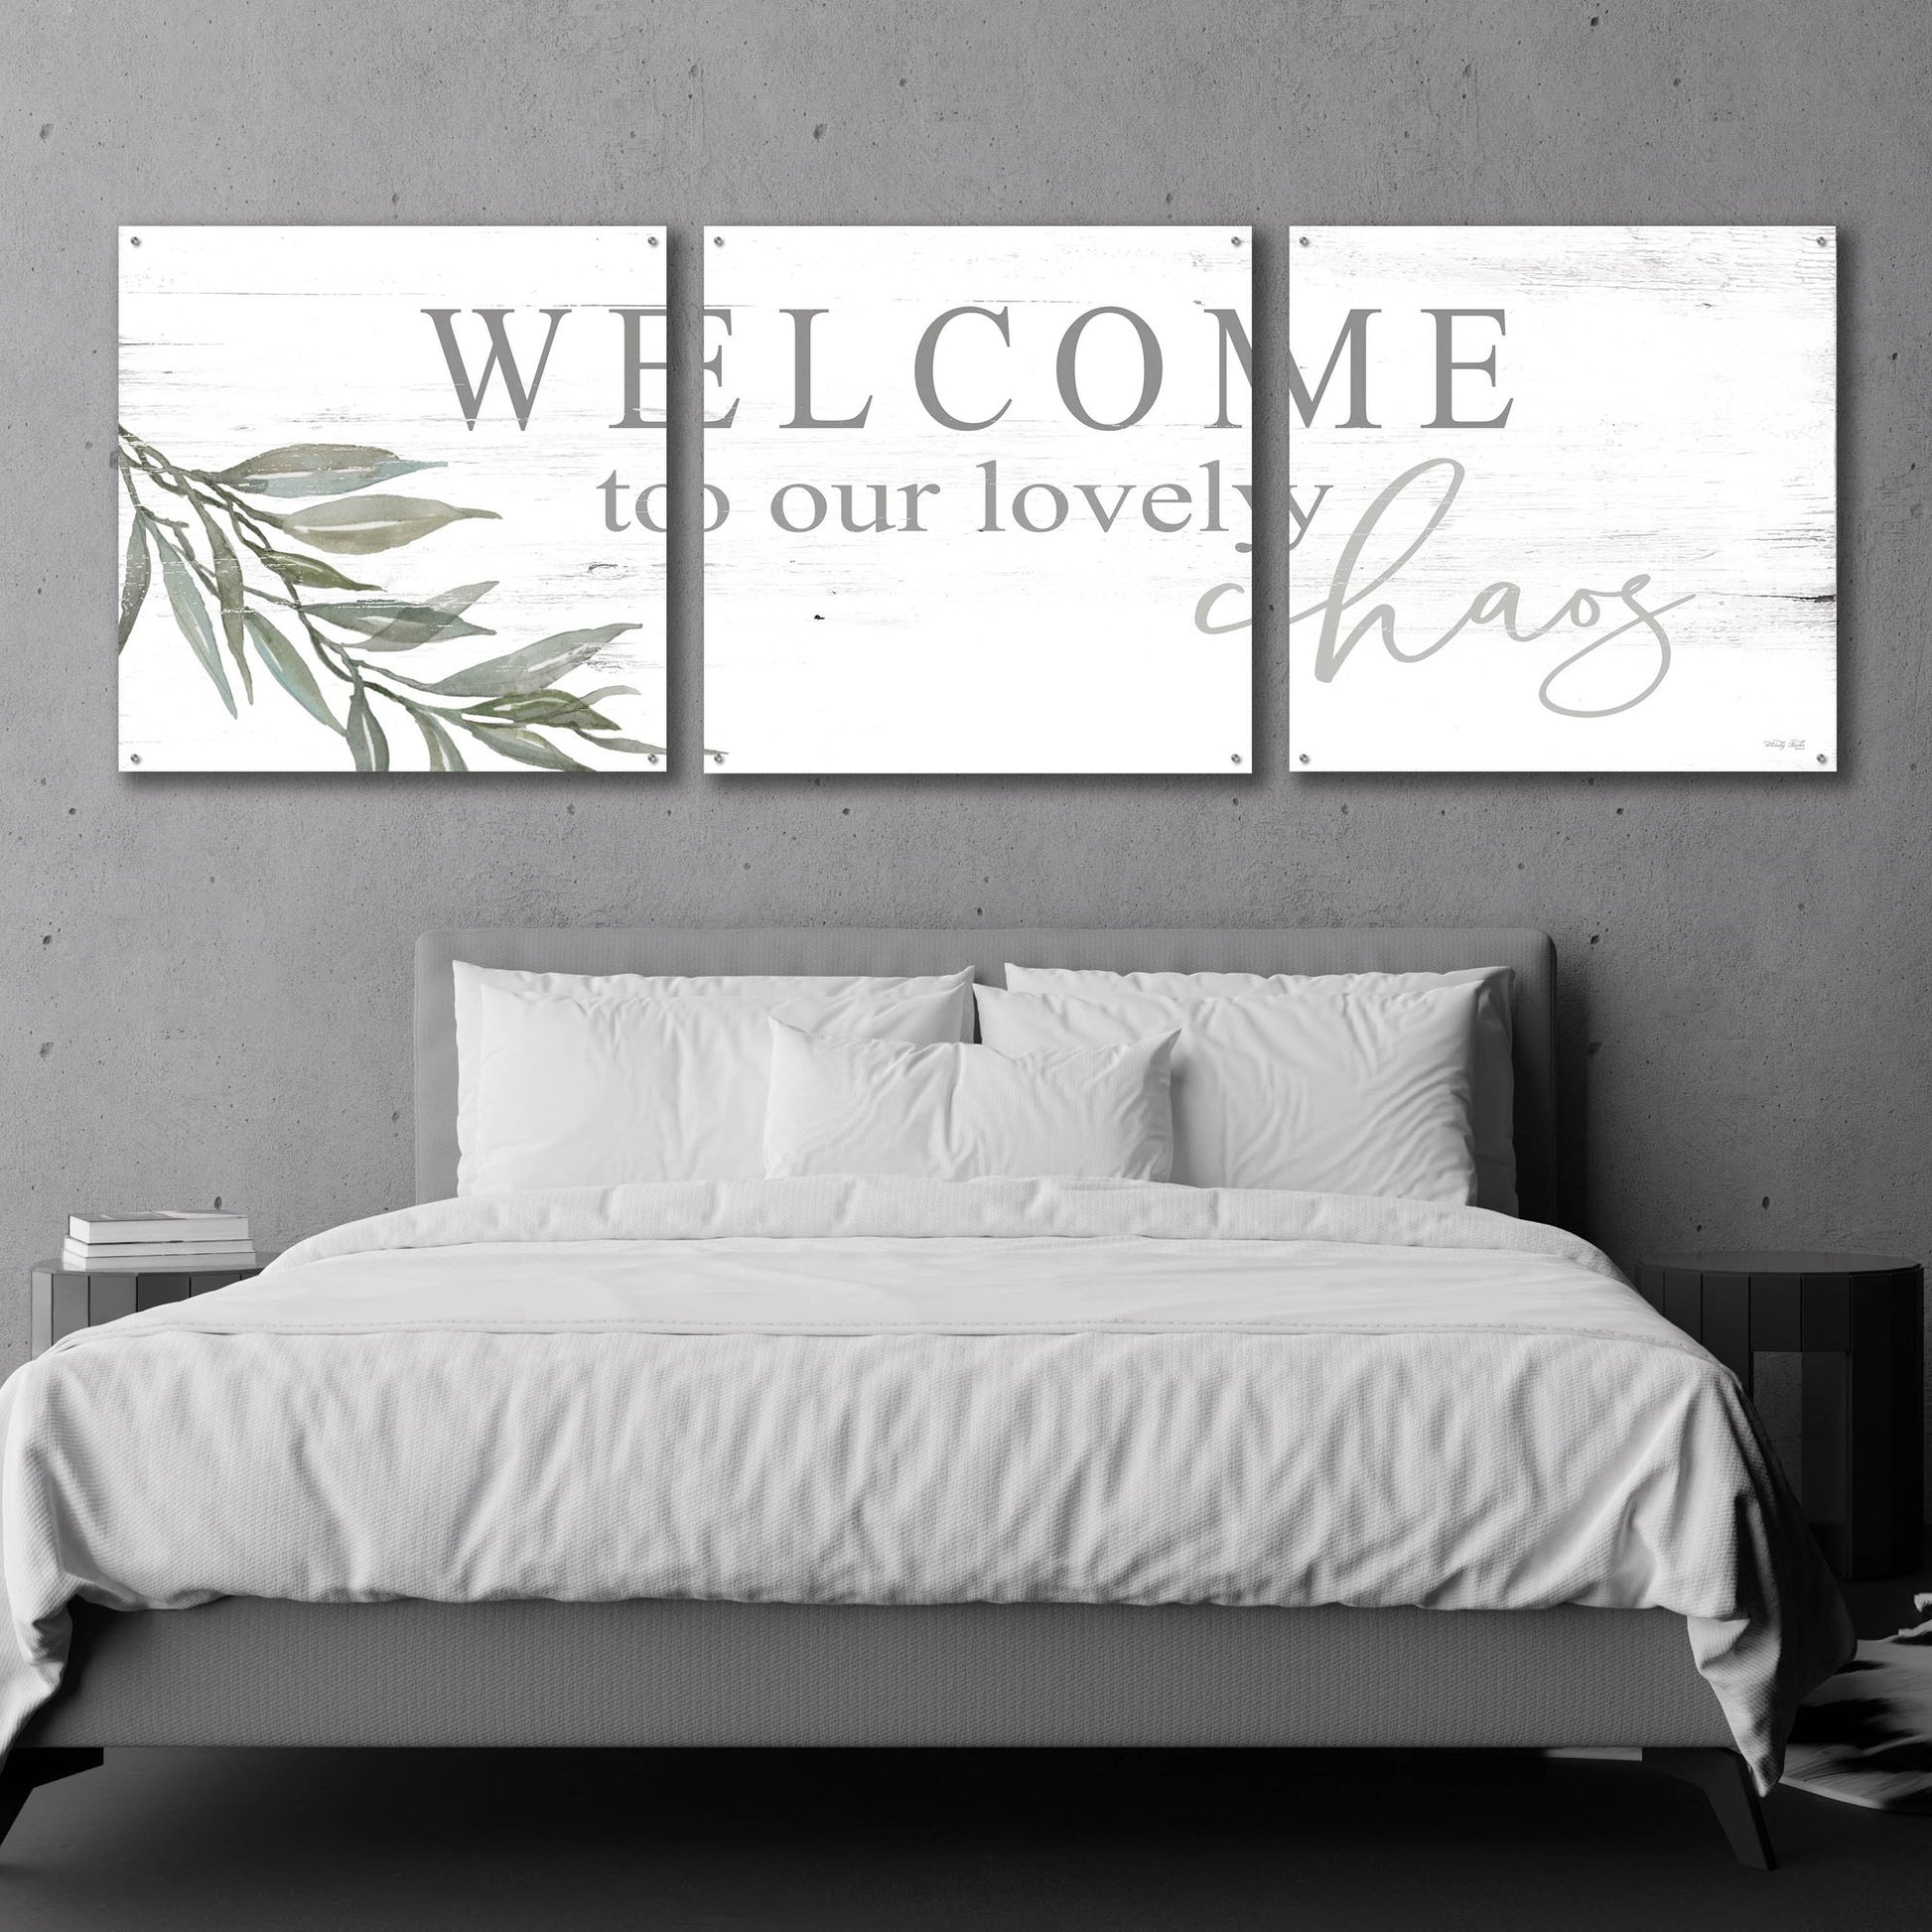 Epic Art 'Welcome to Our Lovely Chaos' by Cindy Jacobs, Acrylic Glass Wall Art, 3 Piece Set,108x36